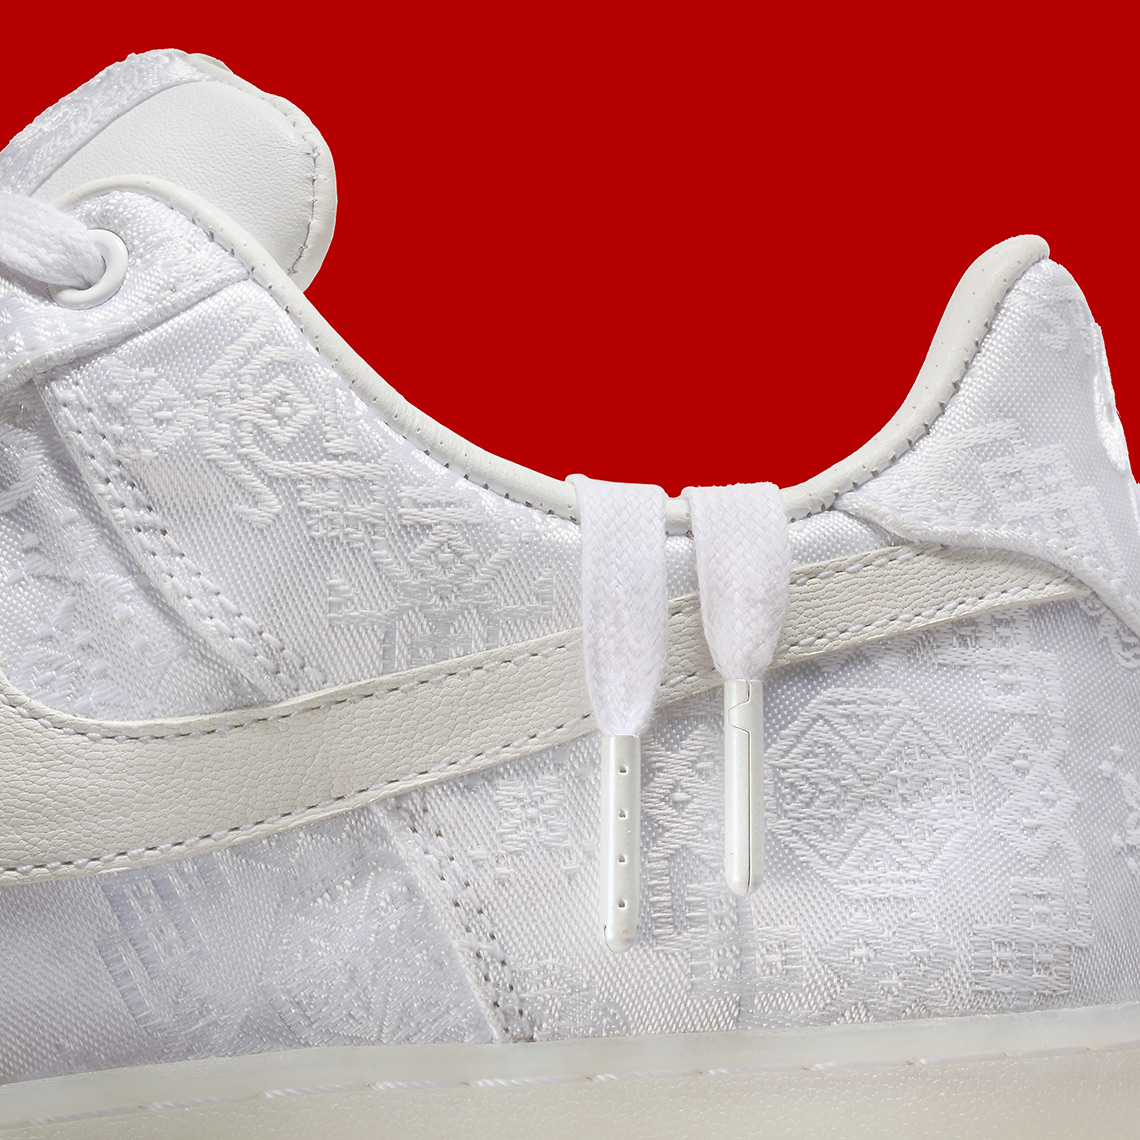 Clot Nike Air Force 1 Official Images Ao9286 100 2